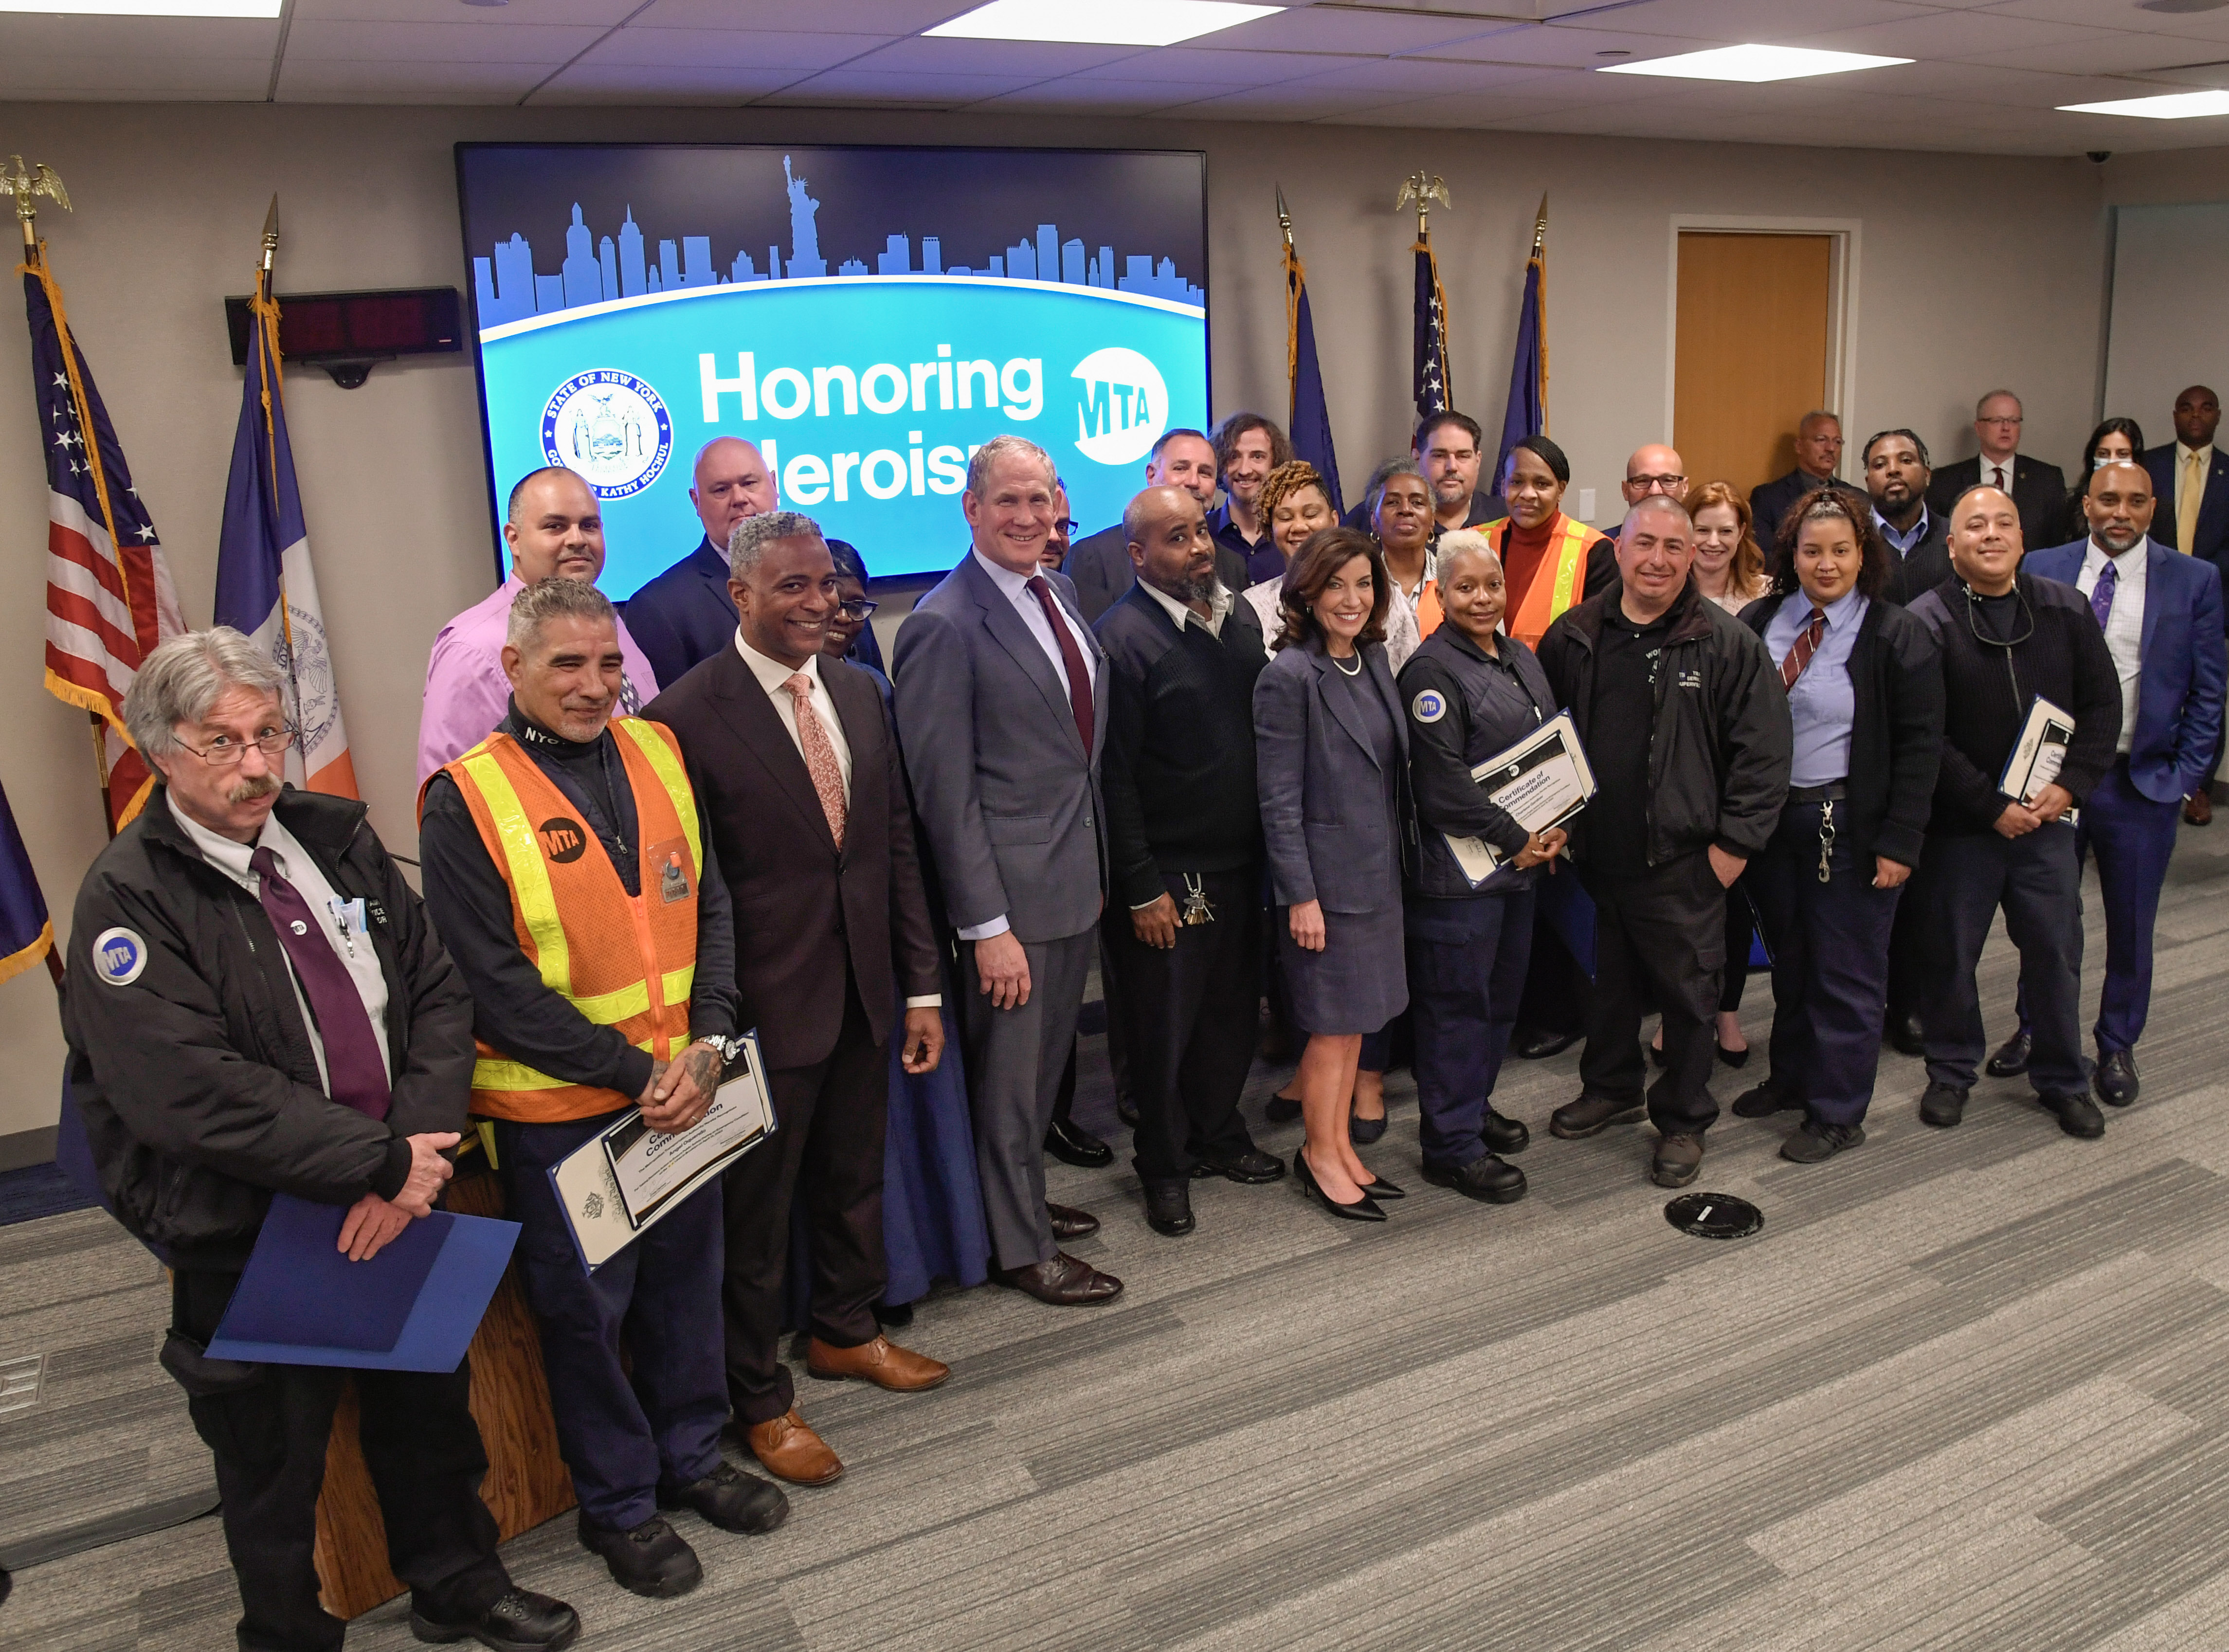 Governor Hochul and MTA Chair and CEO Lieber Honor Heroic MTA Workers